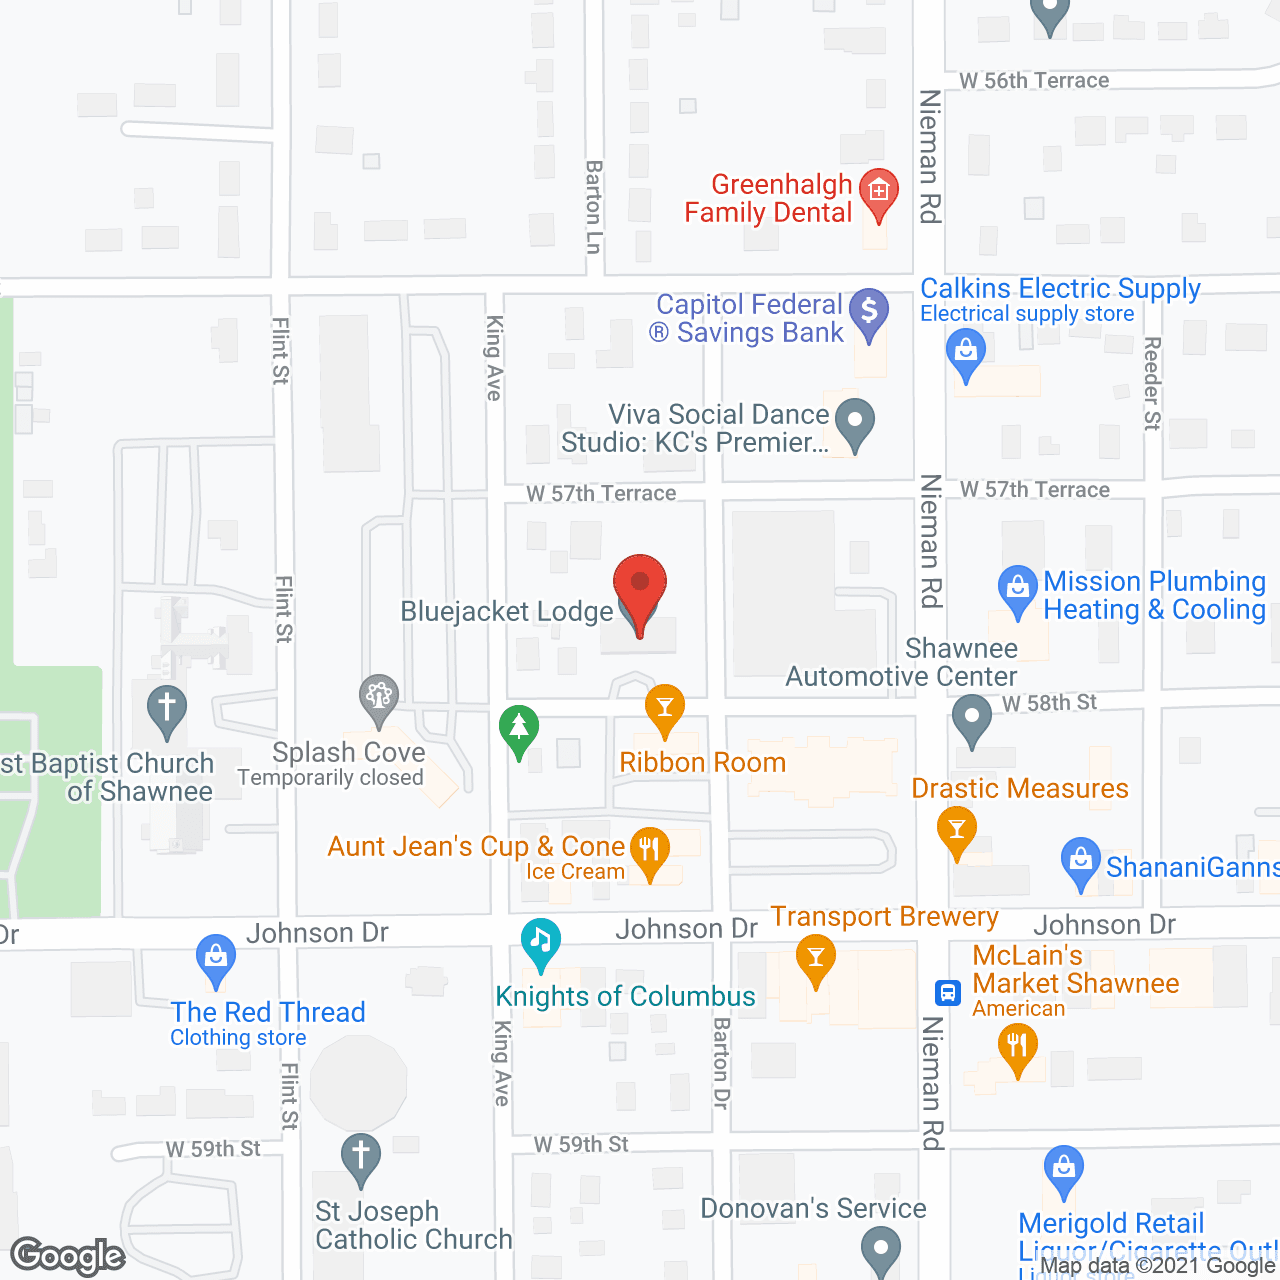 Bluejacket Lodge Apartments in google map